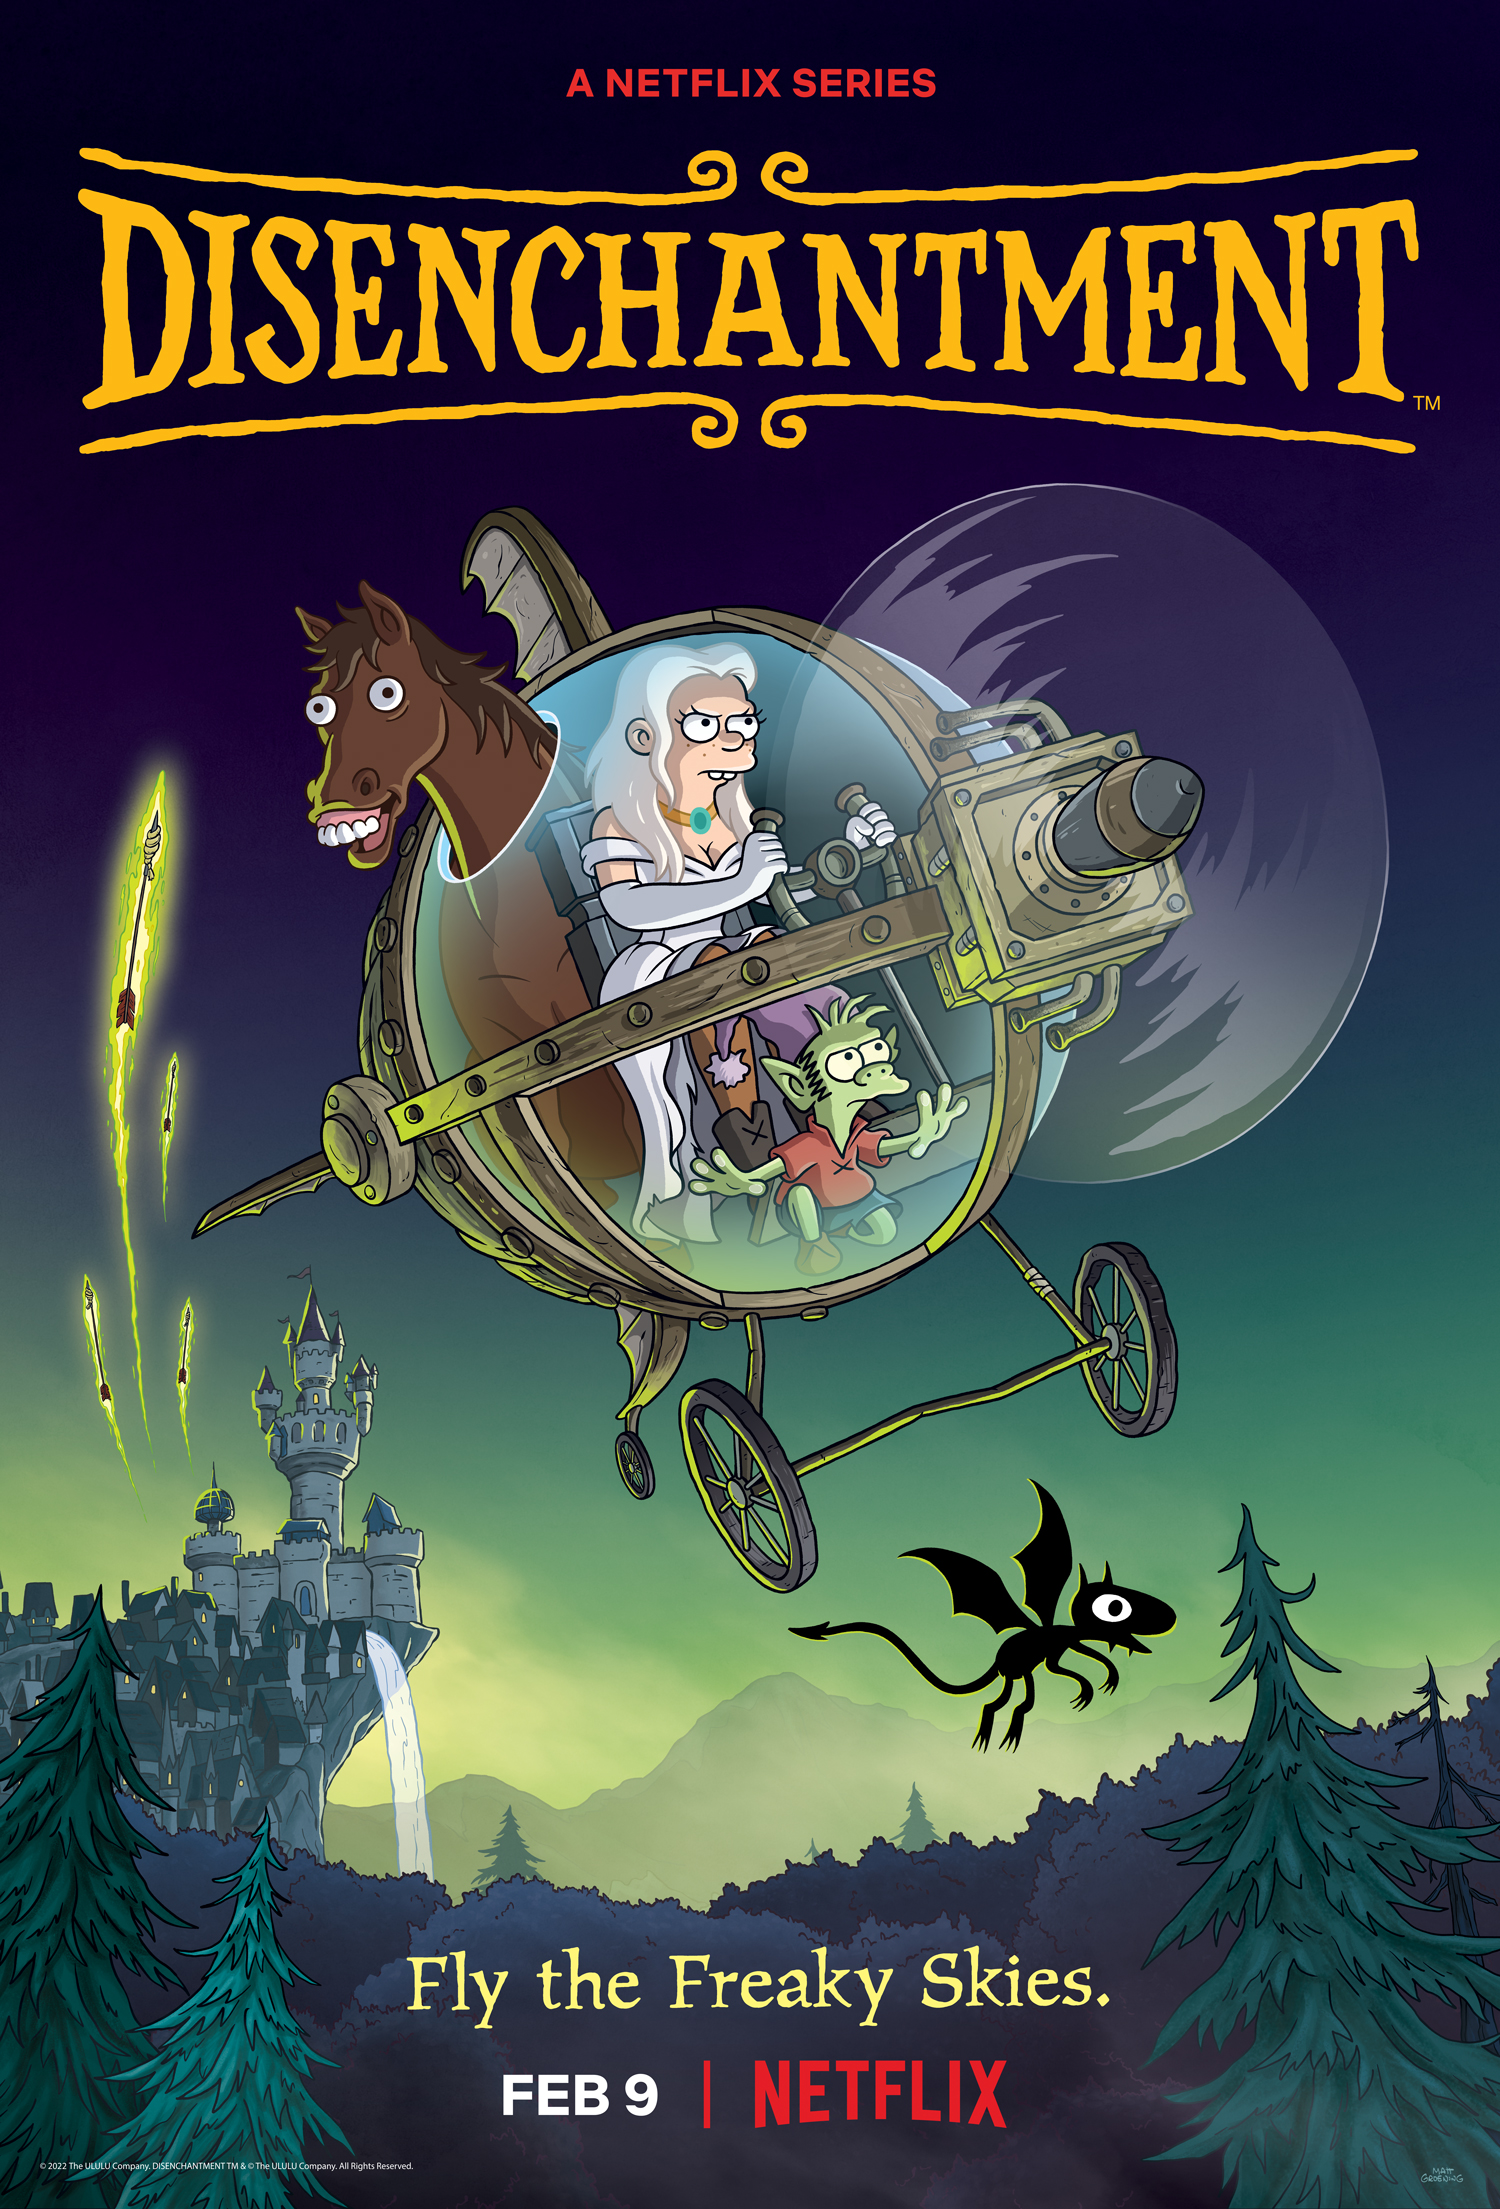 Netflix Teases 'Disenchantment' Part IV In New Trailer and Images | AFA:  Animation For Adults : Animation News, Reviews, Articles, Podcasts and More